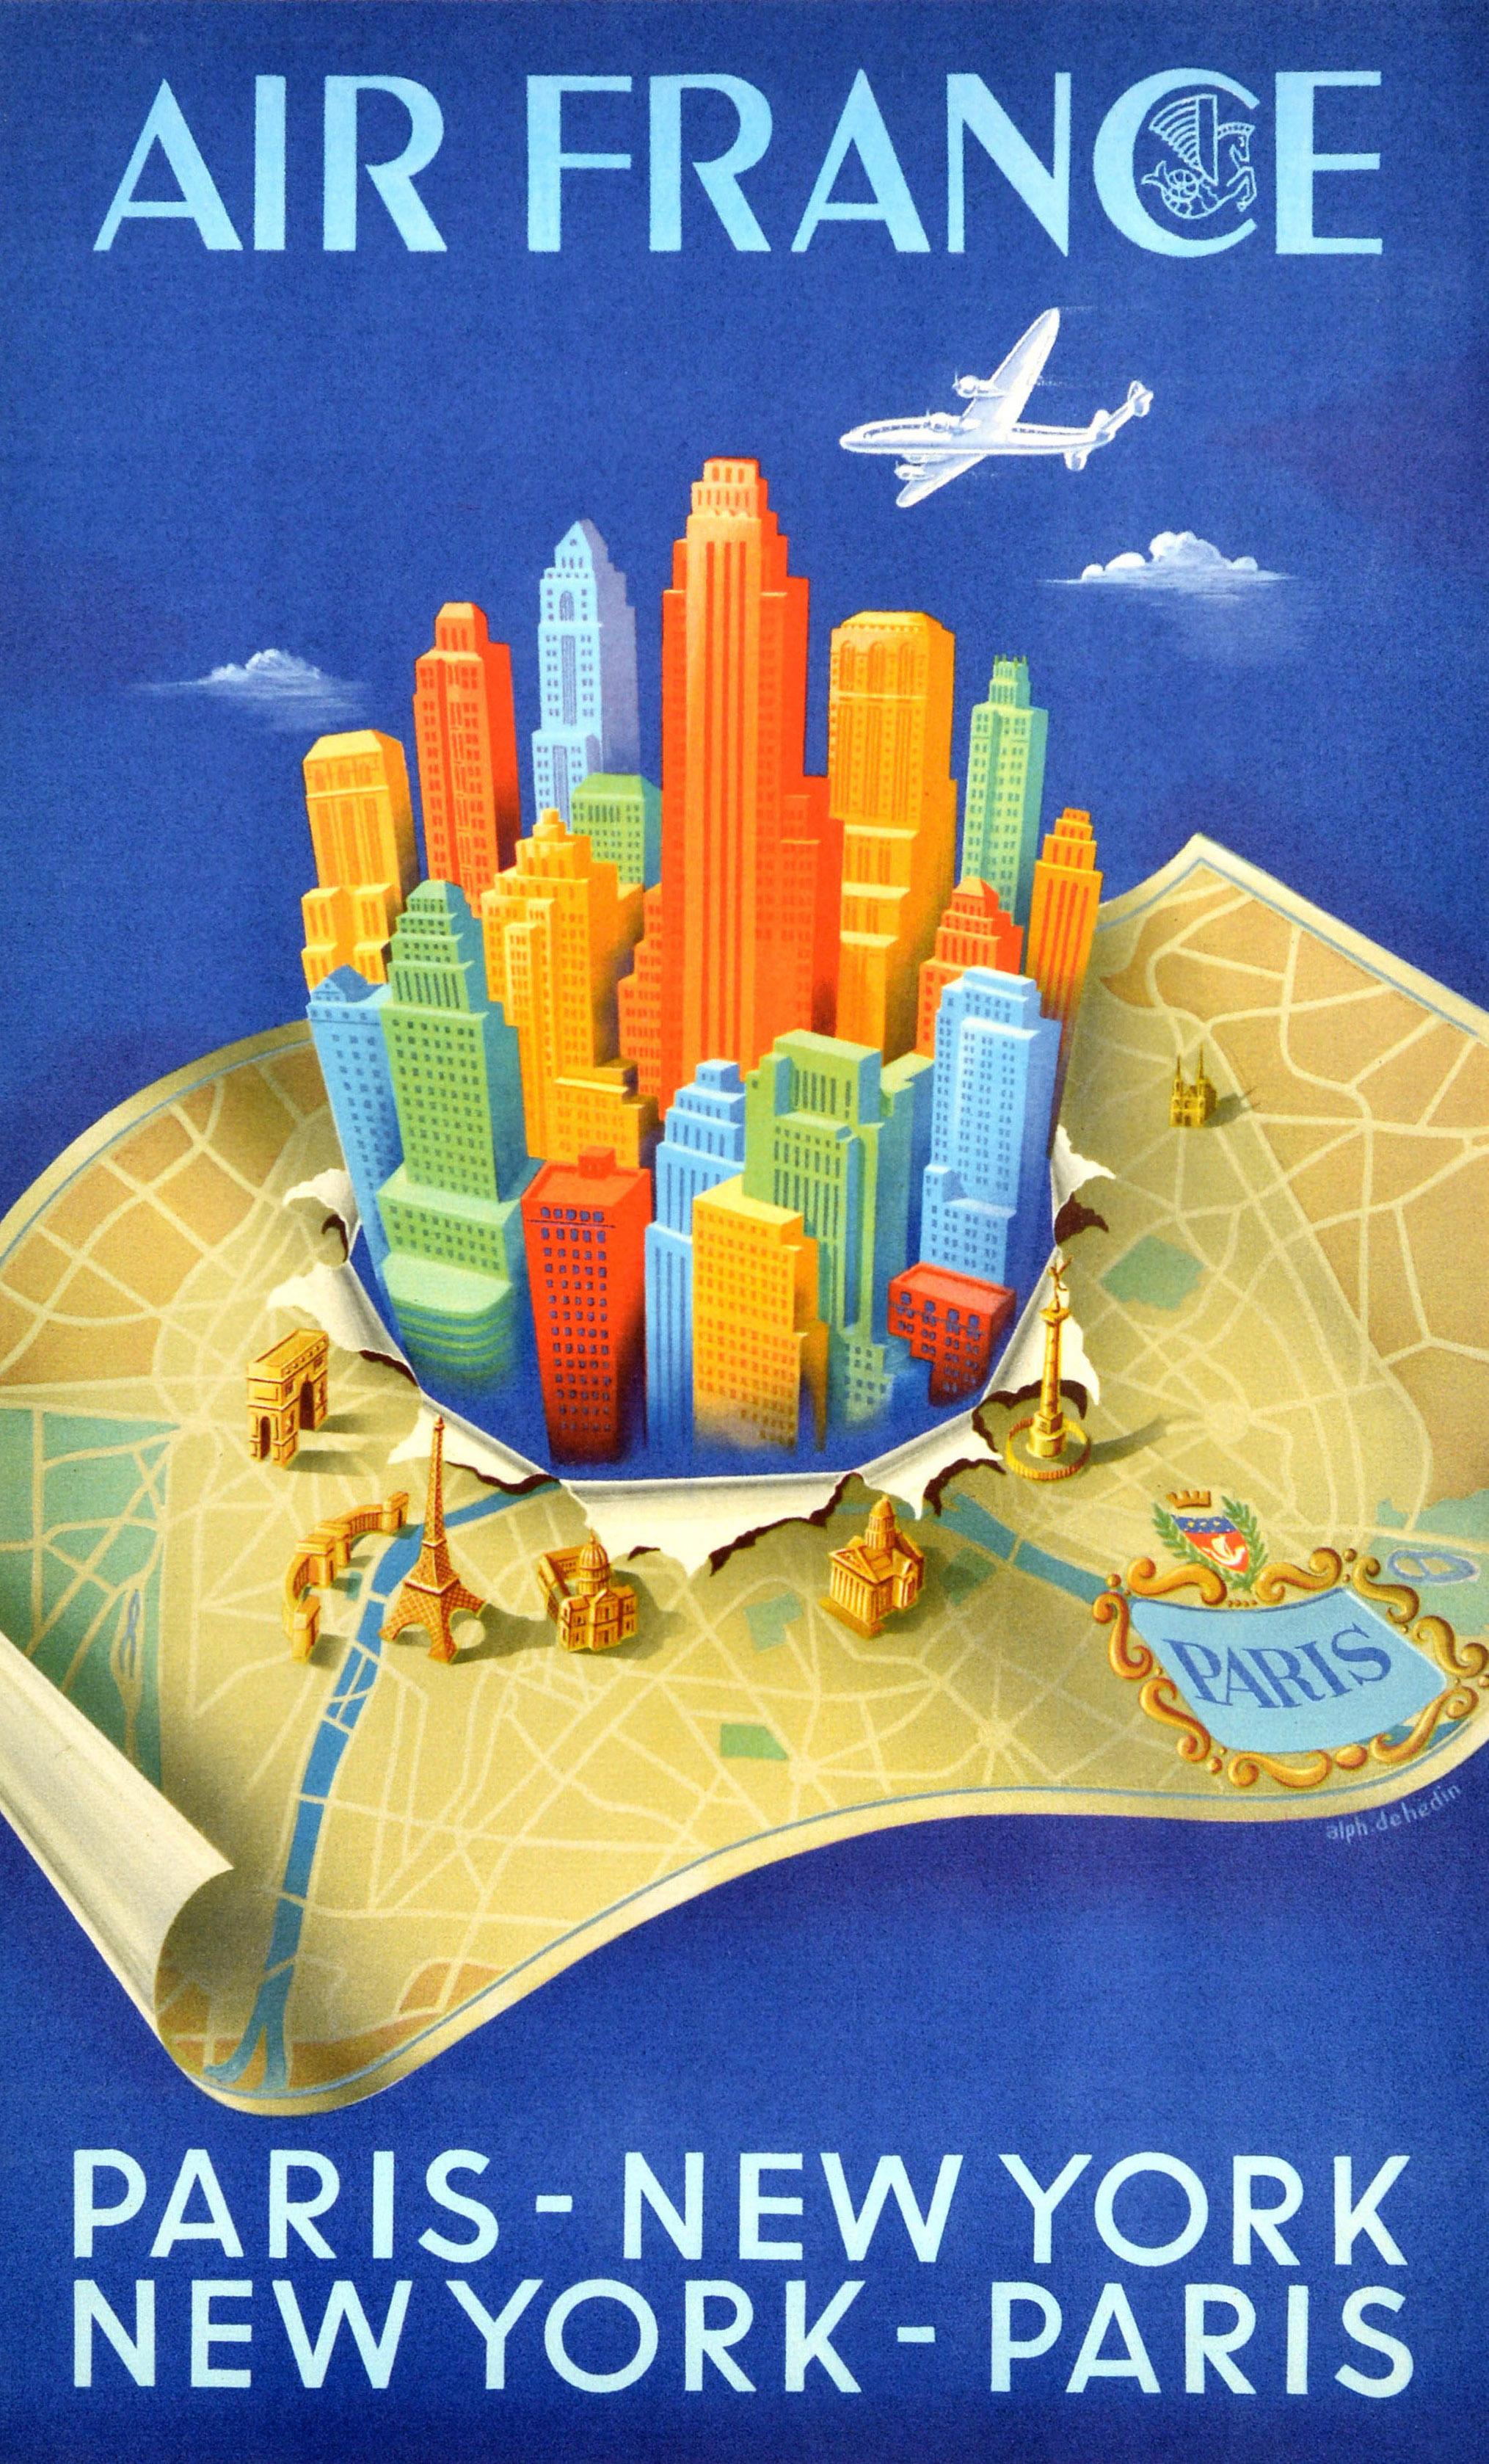 Original vintage travel advertising poster for Air France Paris - New York New York - Paris featuring a great illustration of a propeller plane flying over colourful skyscrapers in New York tearing through a map of Paris showing the River Seine with